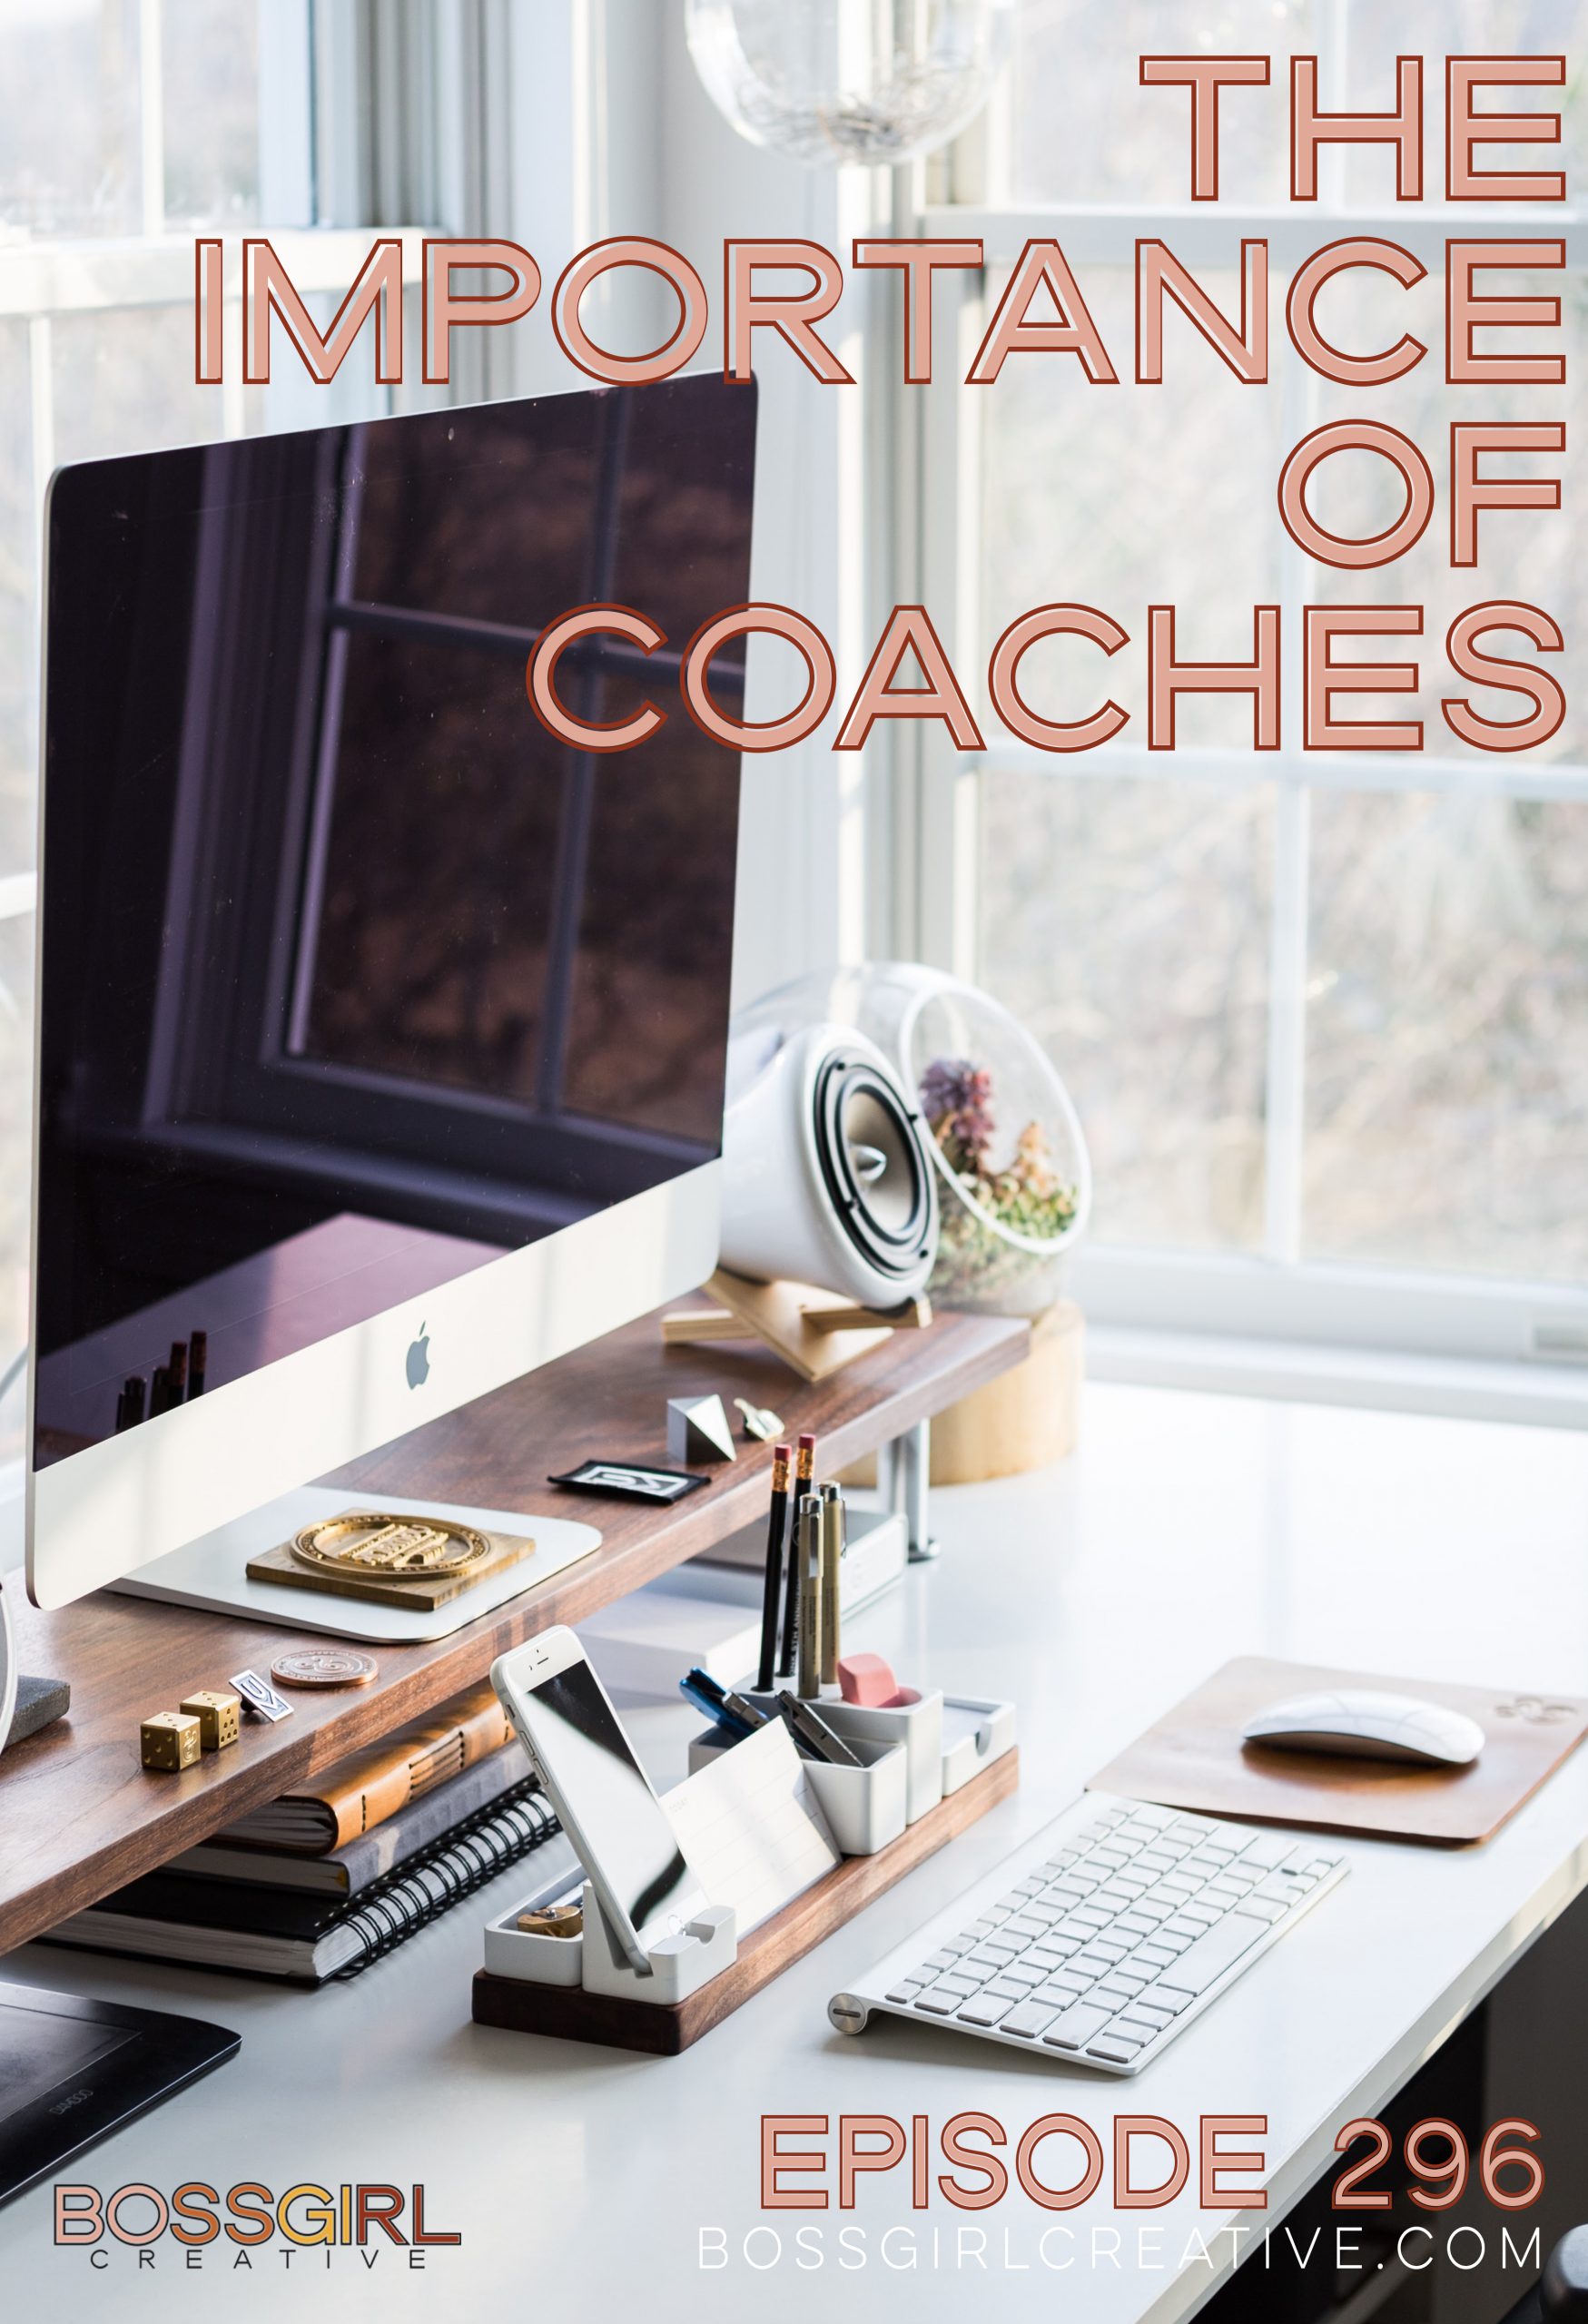 Boss Girl Creative Podcast Episode 296 - The Importance of Coaches